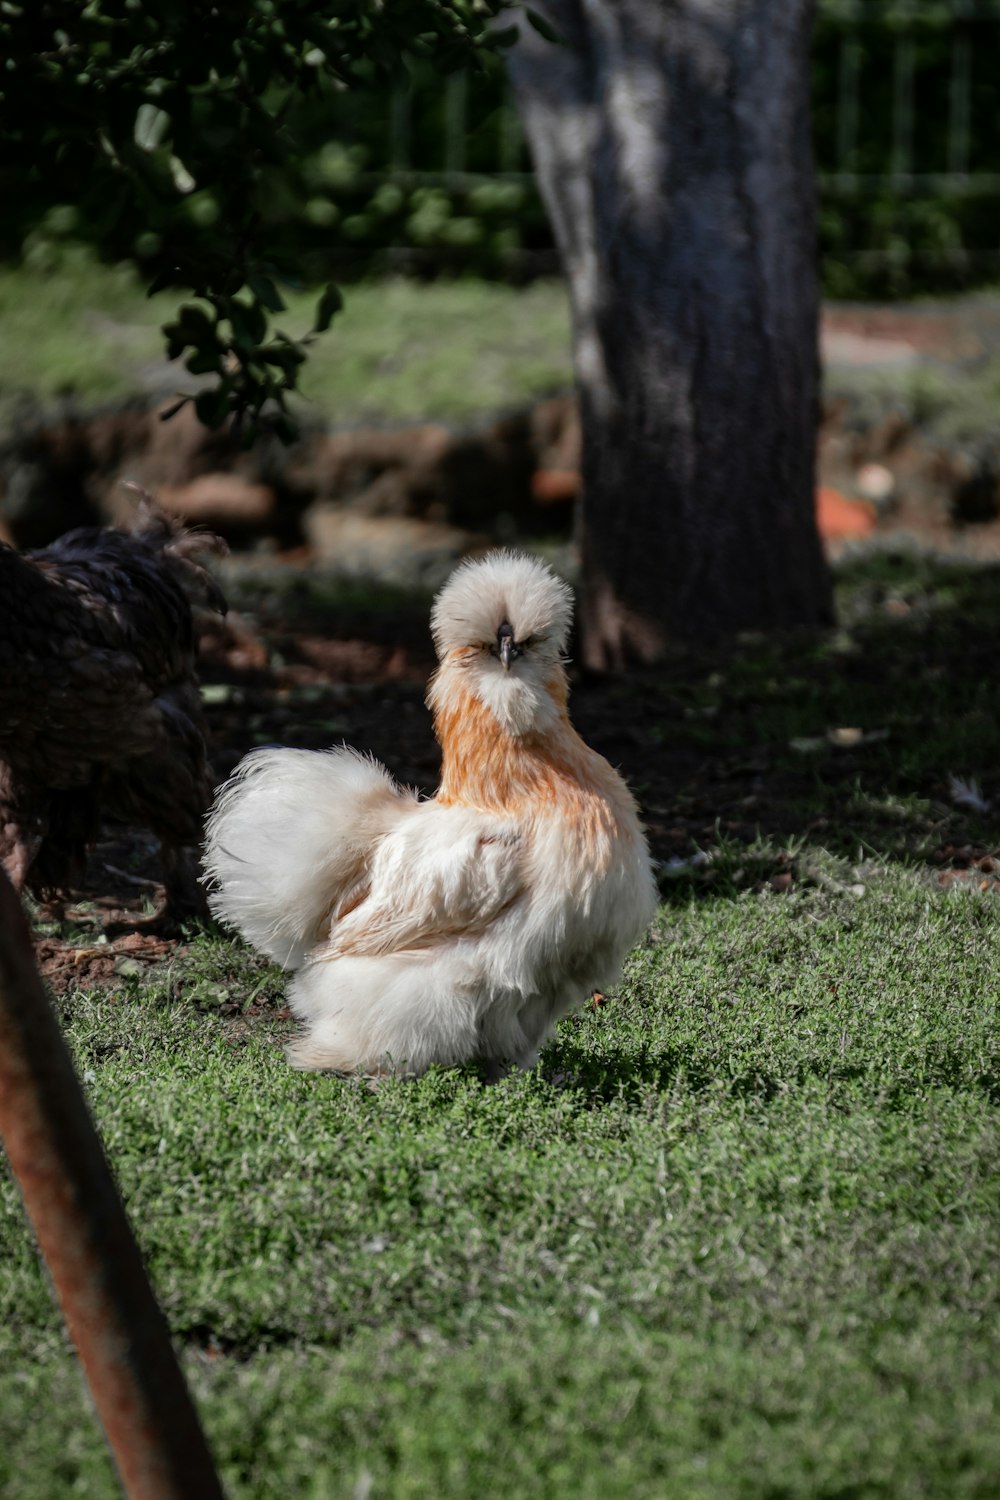 a chicken is standing in the grass near a tree